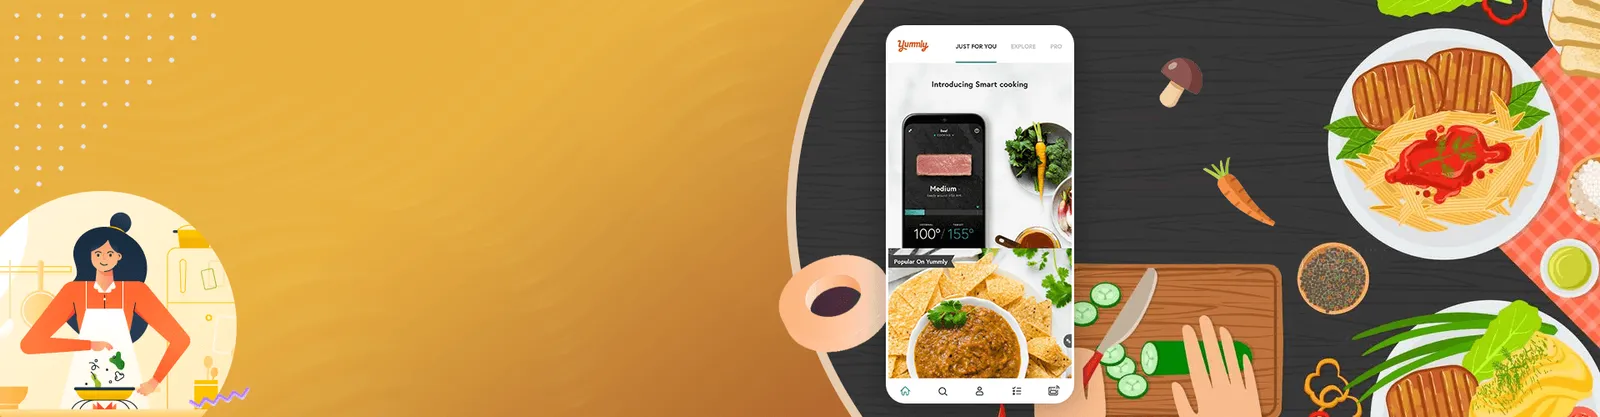 Recipe and Cooking App development: Build an app like Yummly and Cooking